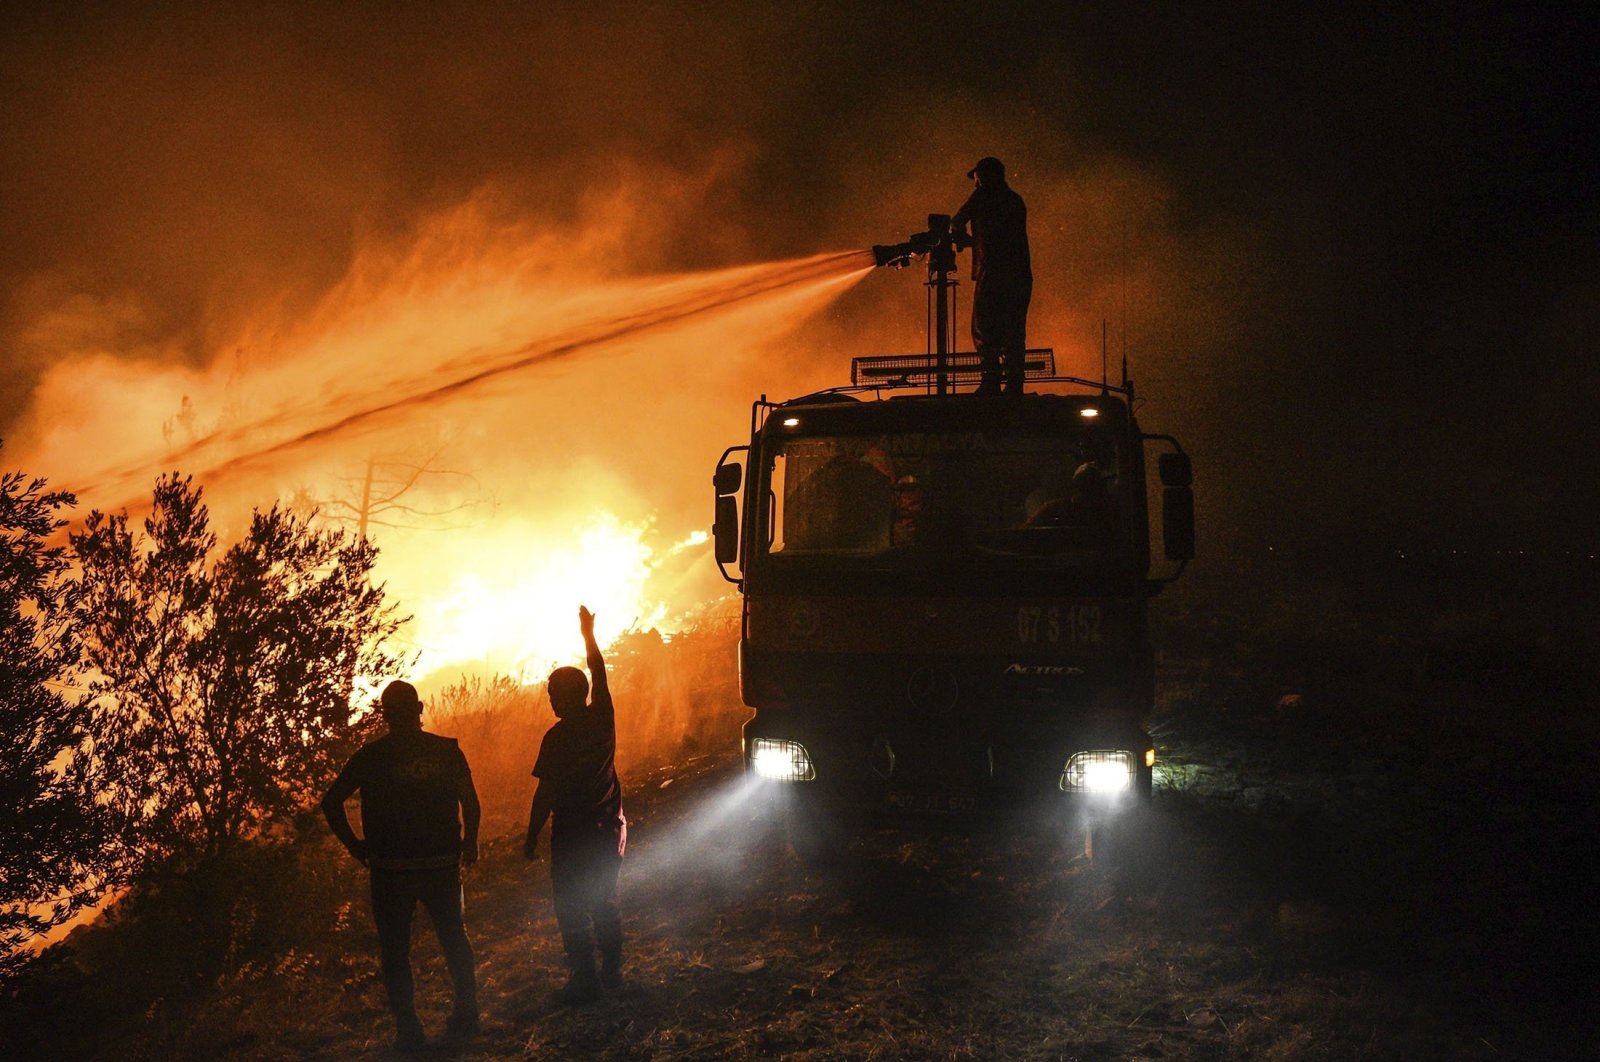 Firefighters and local people fighting fires in the village of Kirli, Antalya province, Turkey, July 2021 (source: Daily Sabah)